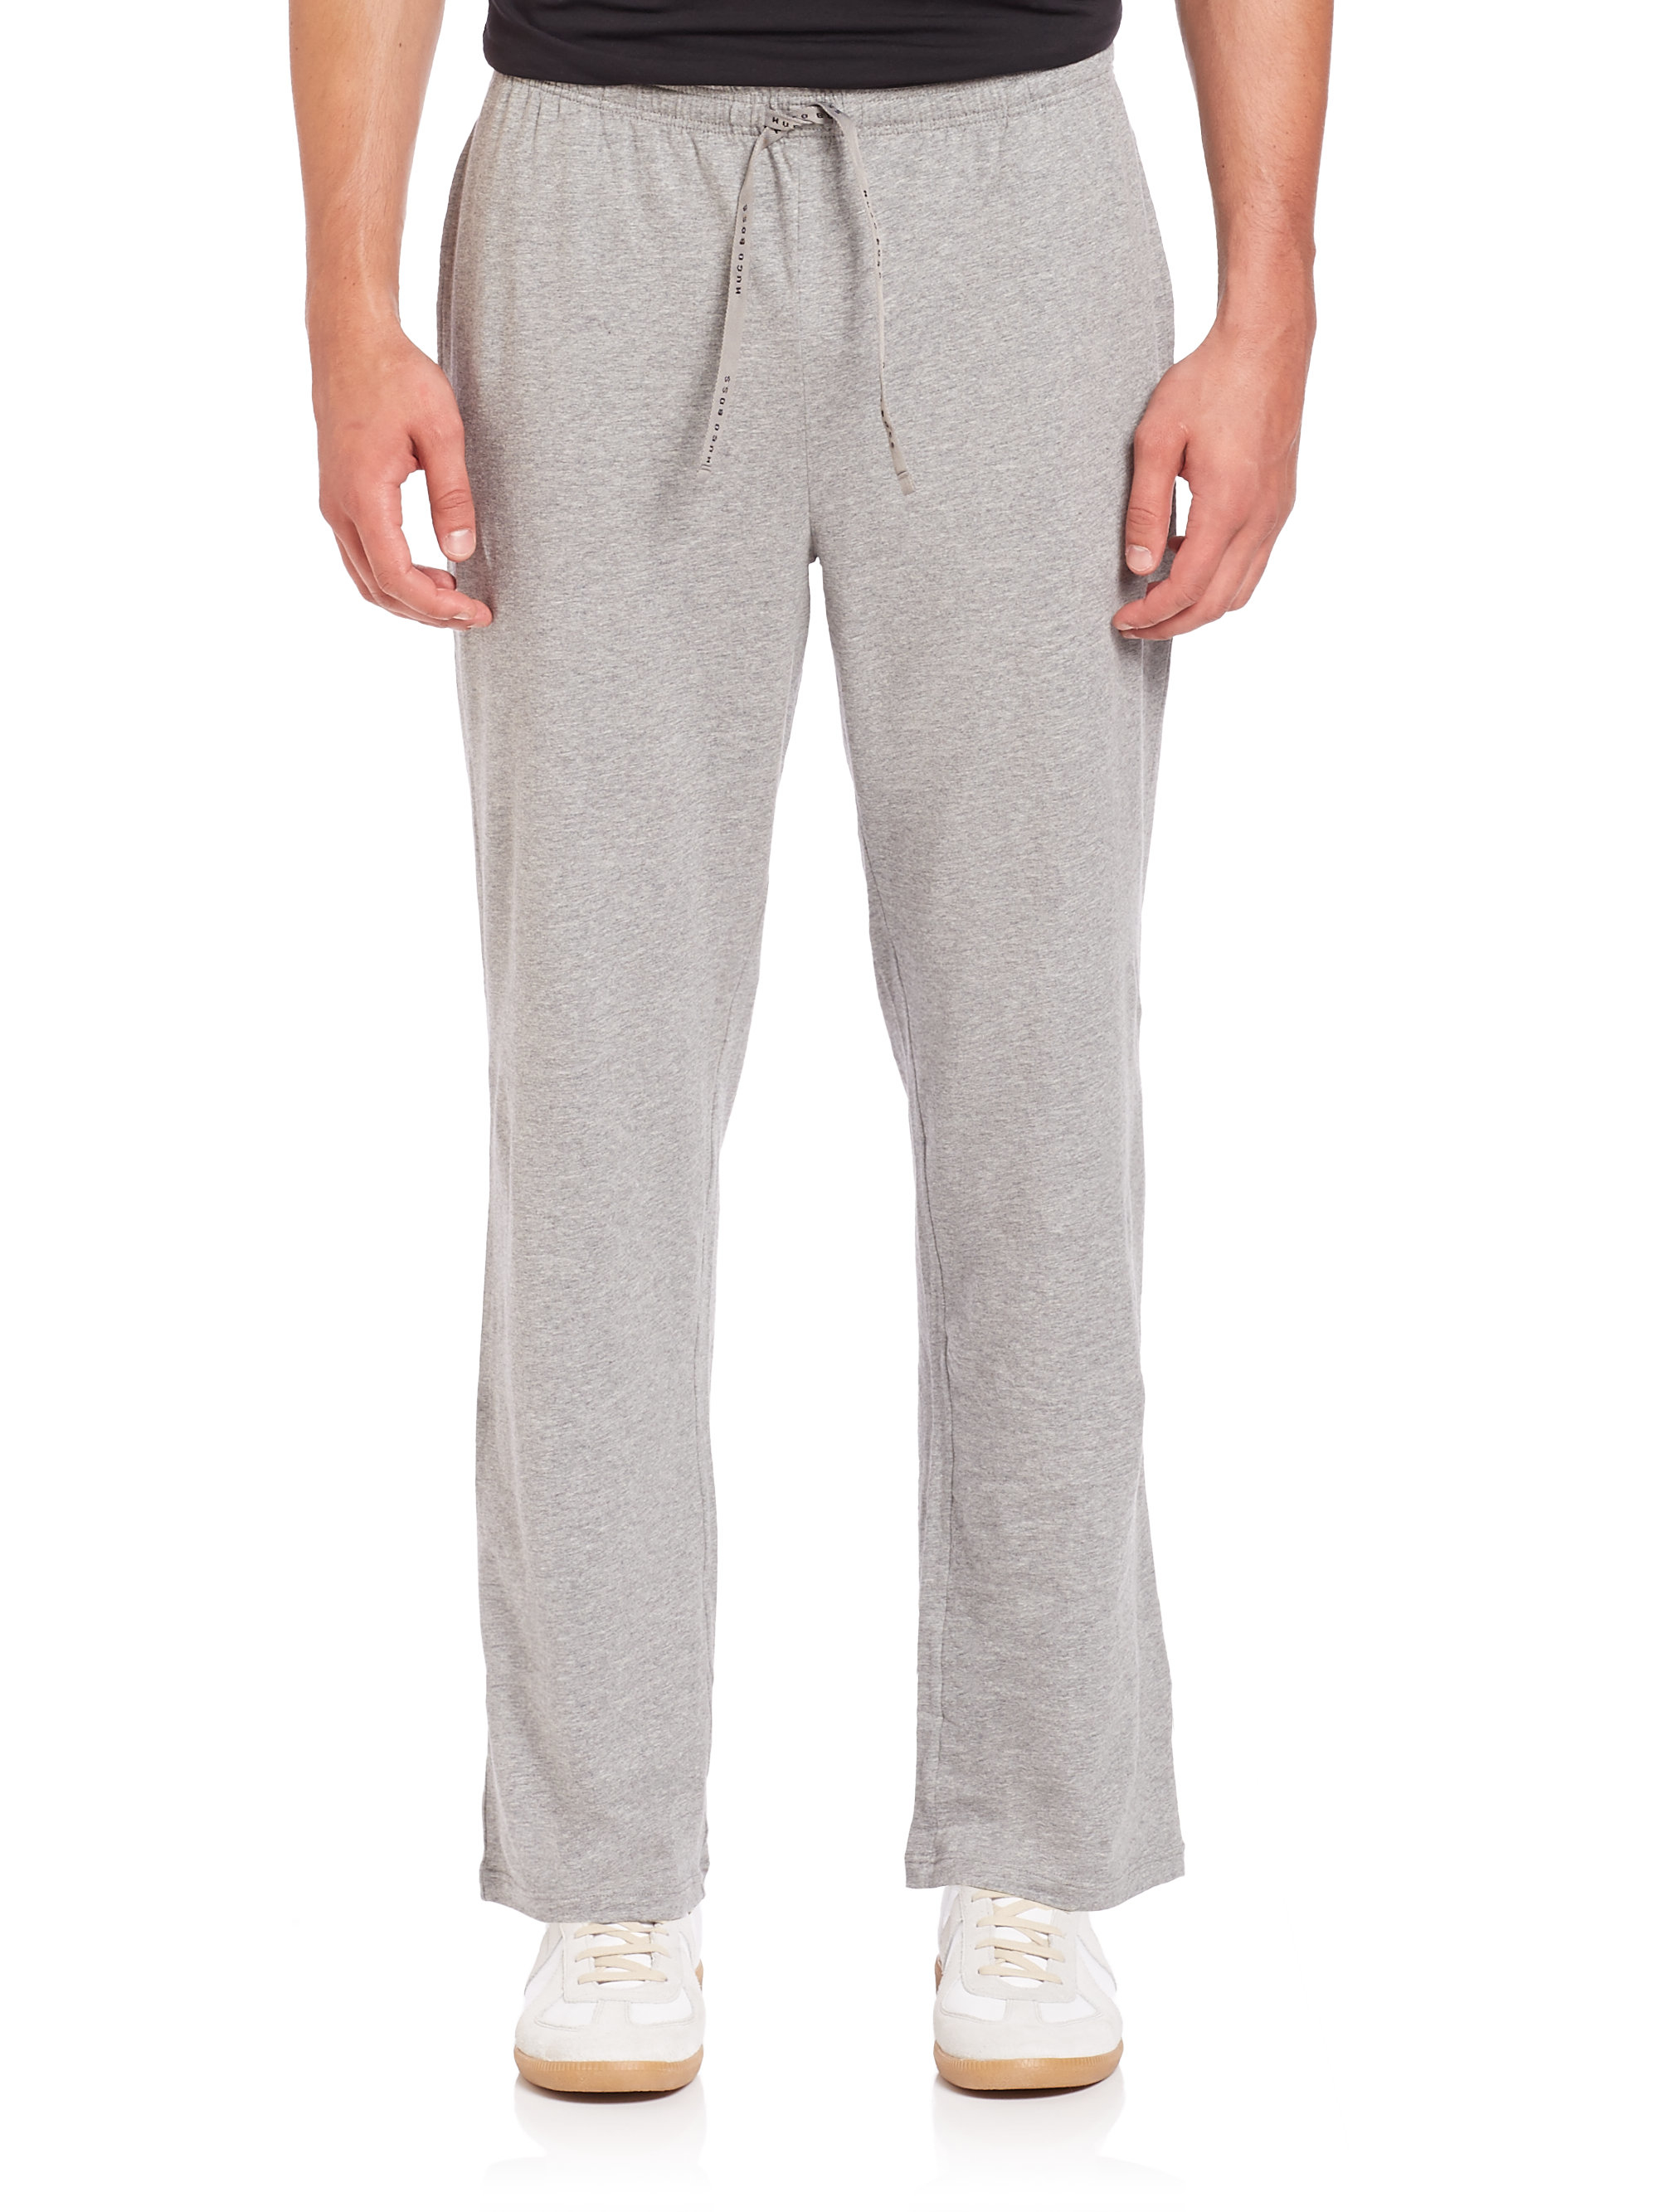 Lyst - Boss Stretch Cotton Knit Lounge Pants in Gray for Men